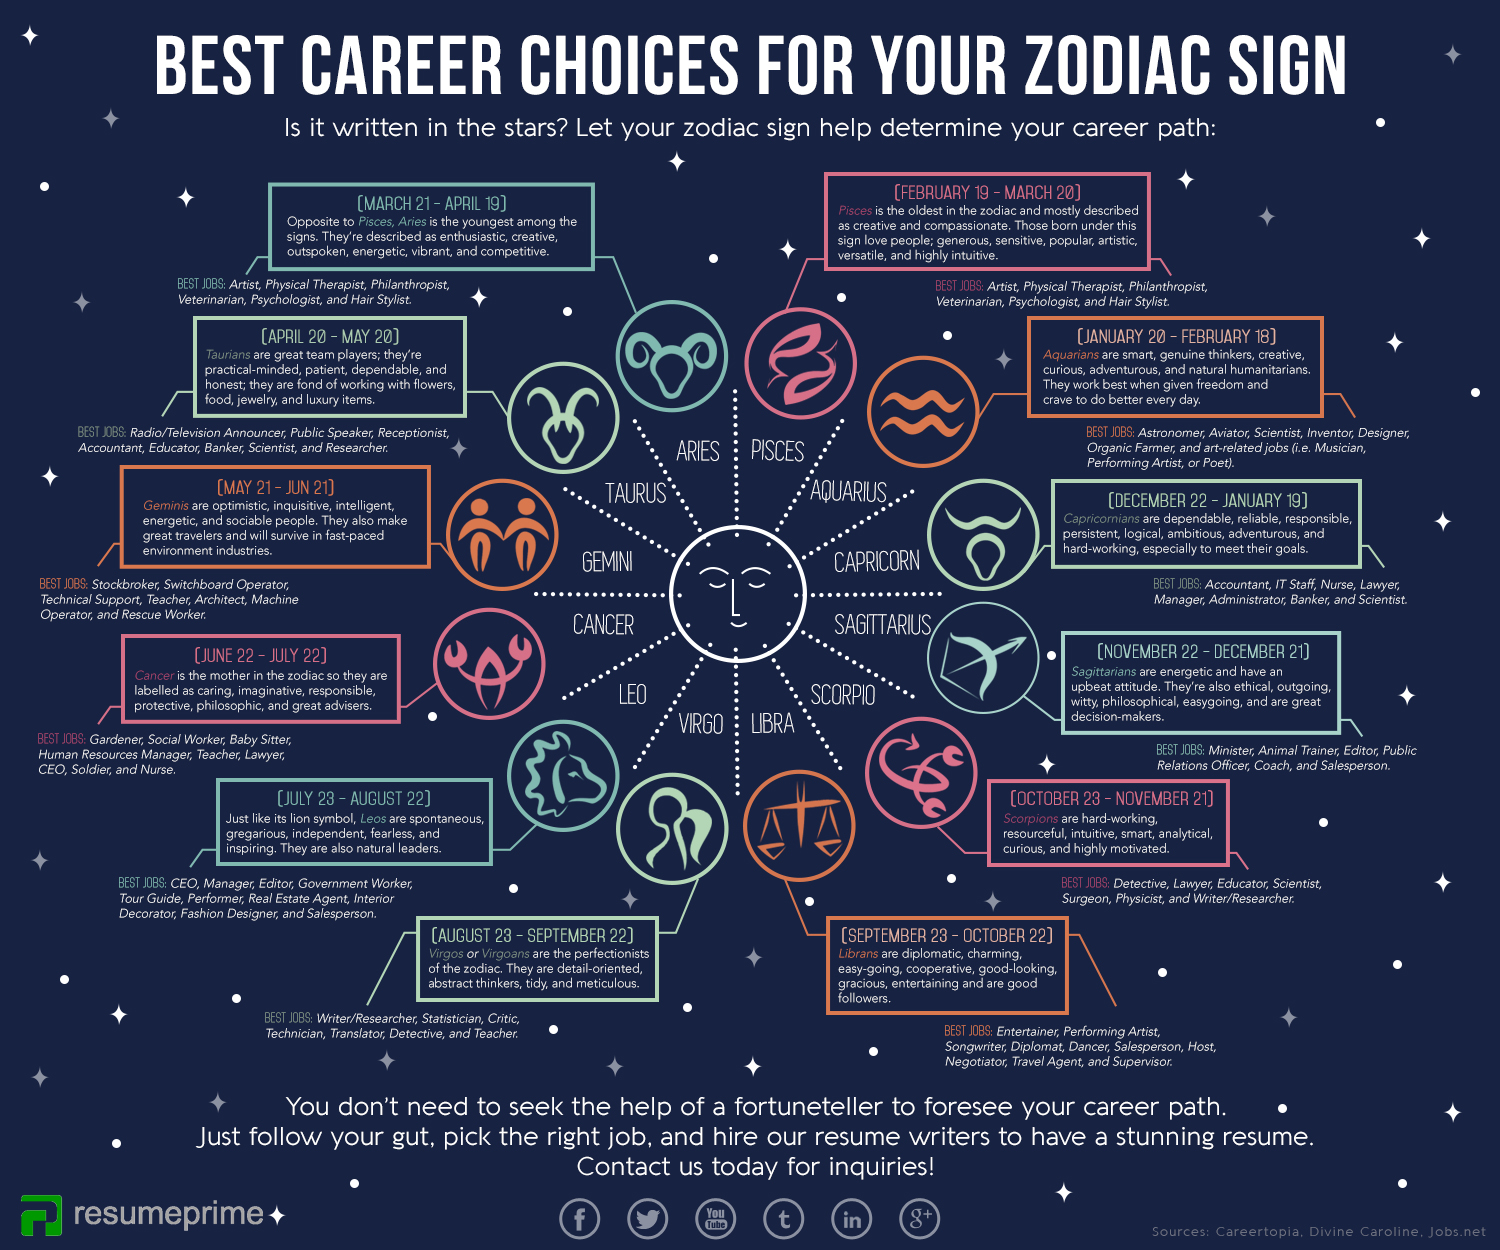 Best Career Choices for Your Zodiac Sign [Infographic]